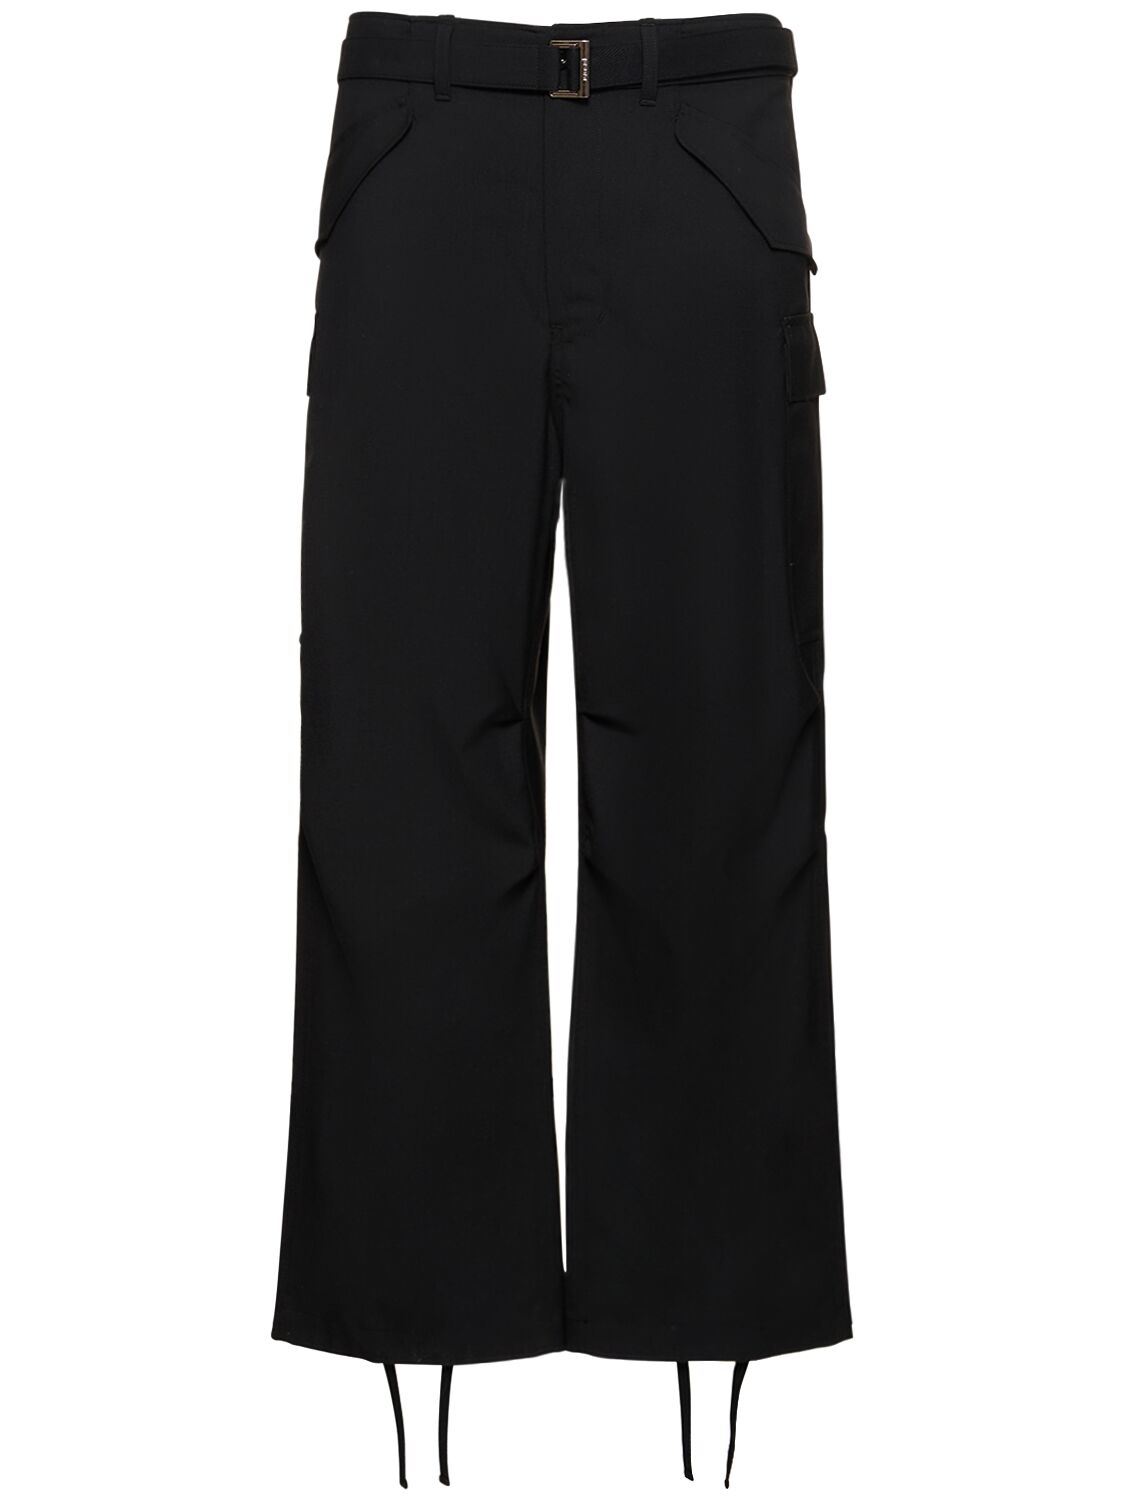 Sacai Tailored Suiting Pants In Black